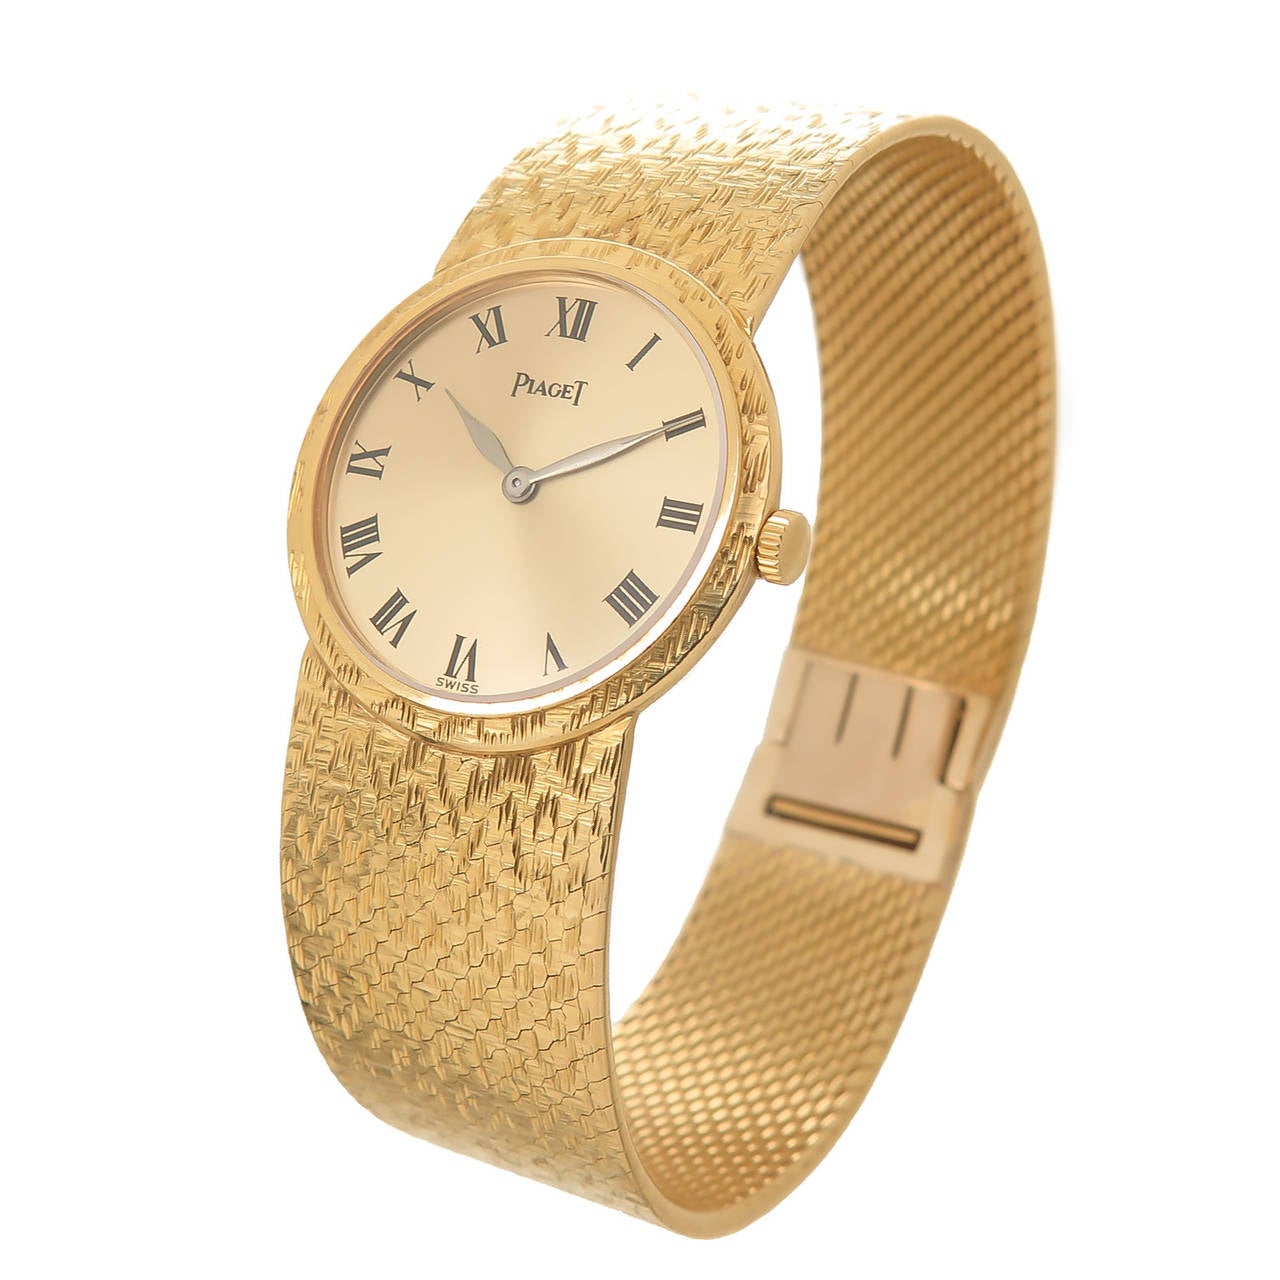 Circa 1970s Piaget 18K Yellow Gold Piaget Ladies Wrist Watch, Manual Wind movement, Gold Dial with Black Roman Numerals, watch measures 25 MM in diameter 6 1/2 inch in length and 5/8 inch wide. The mesh bracelet has a textured finish with a matching